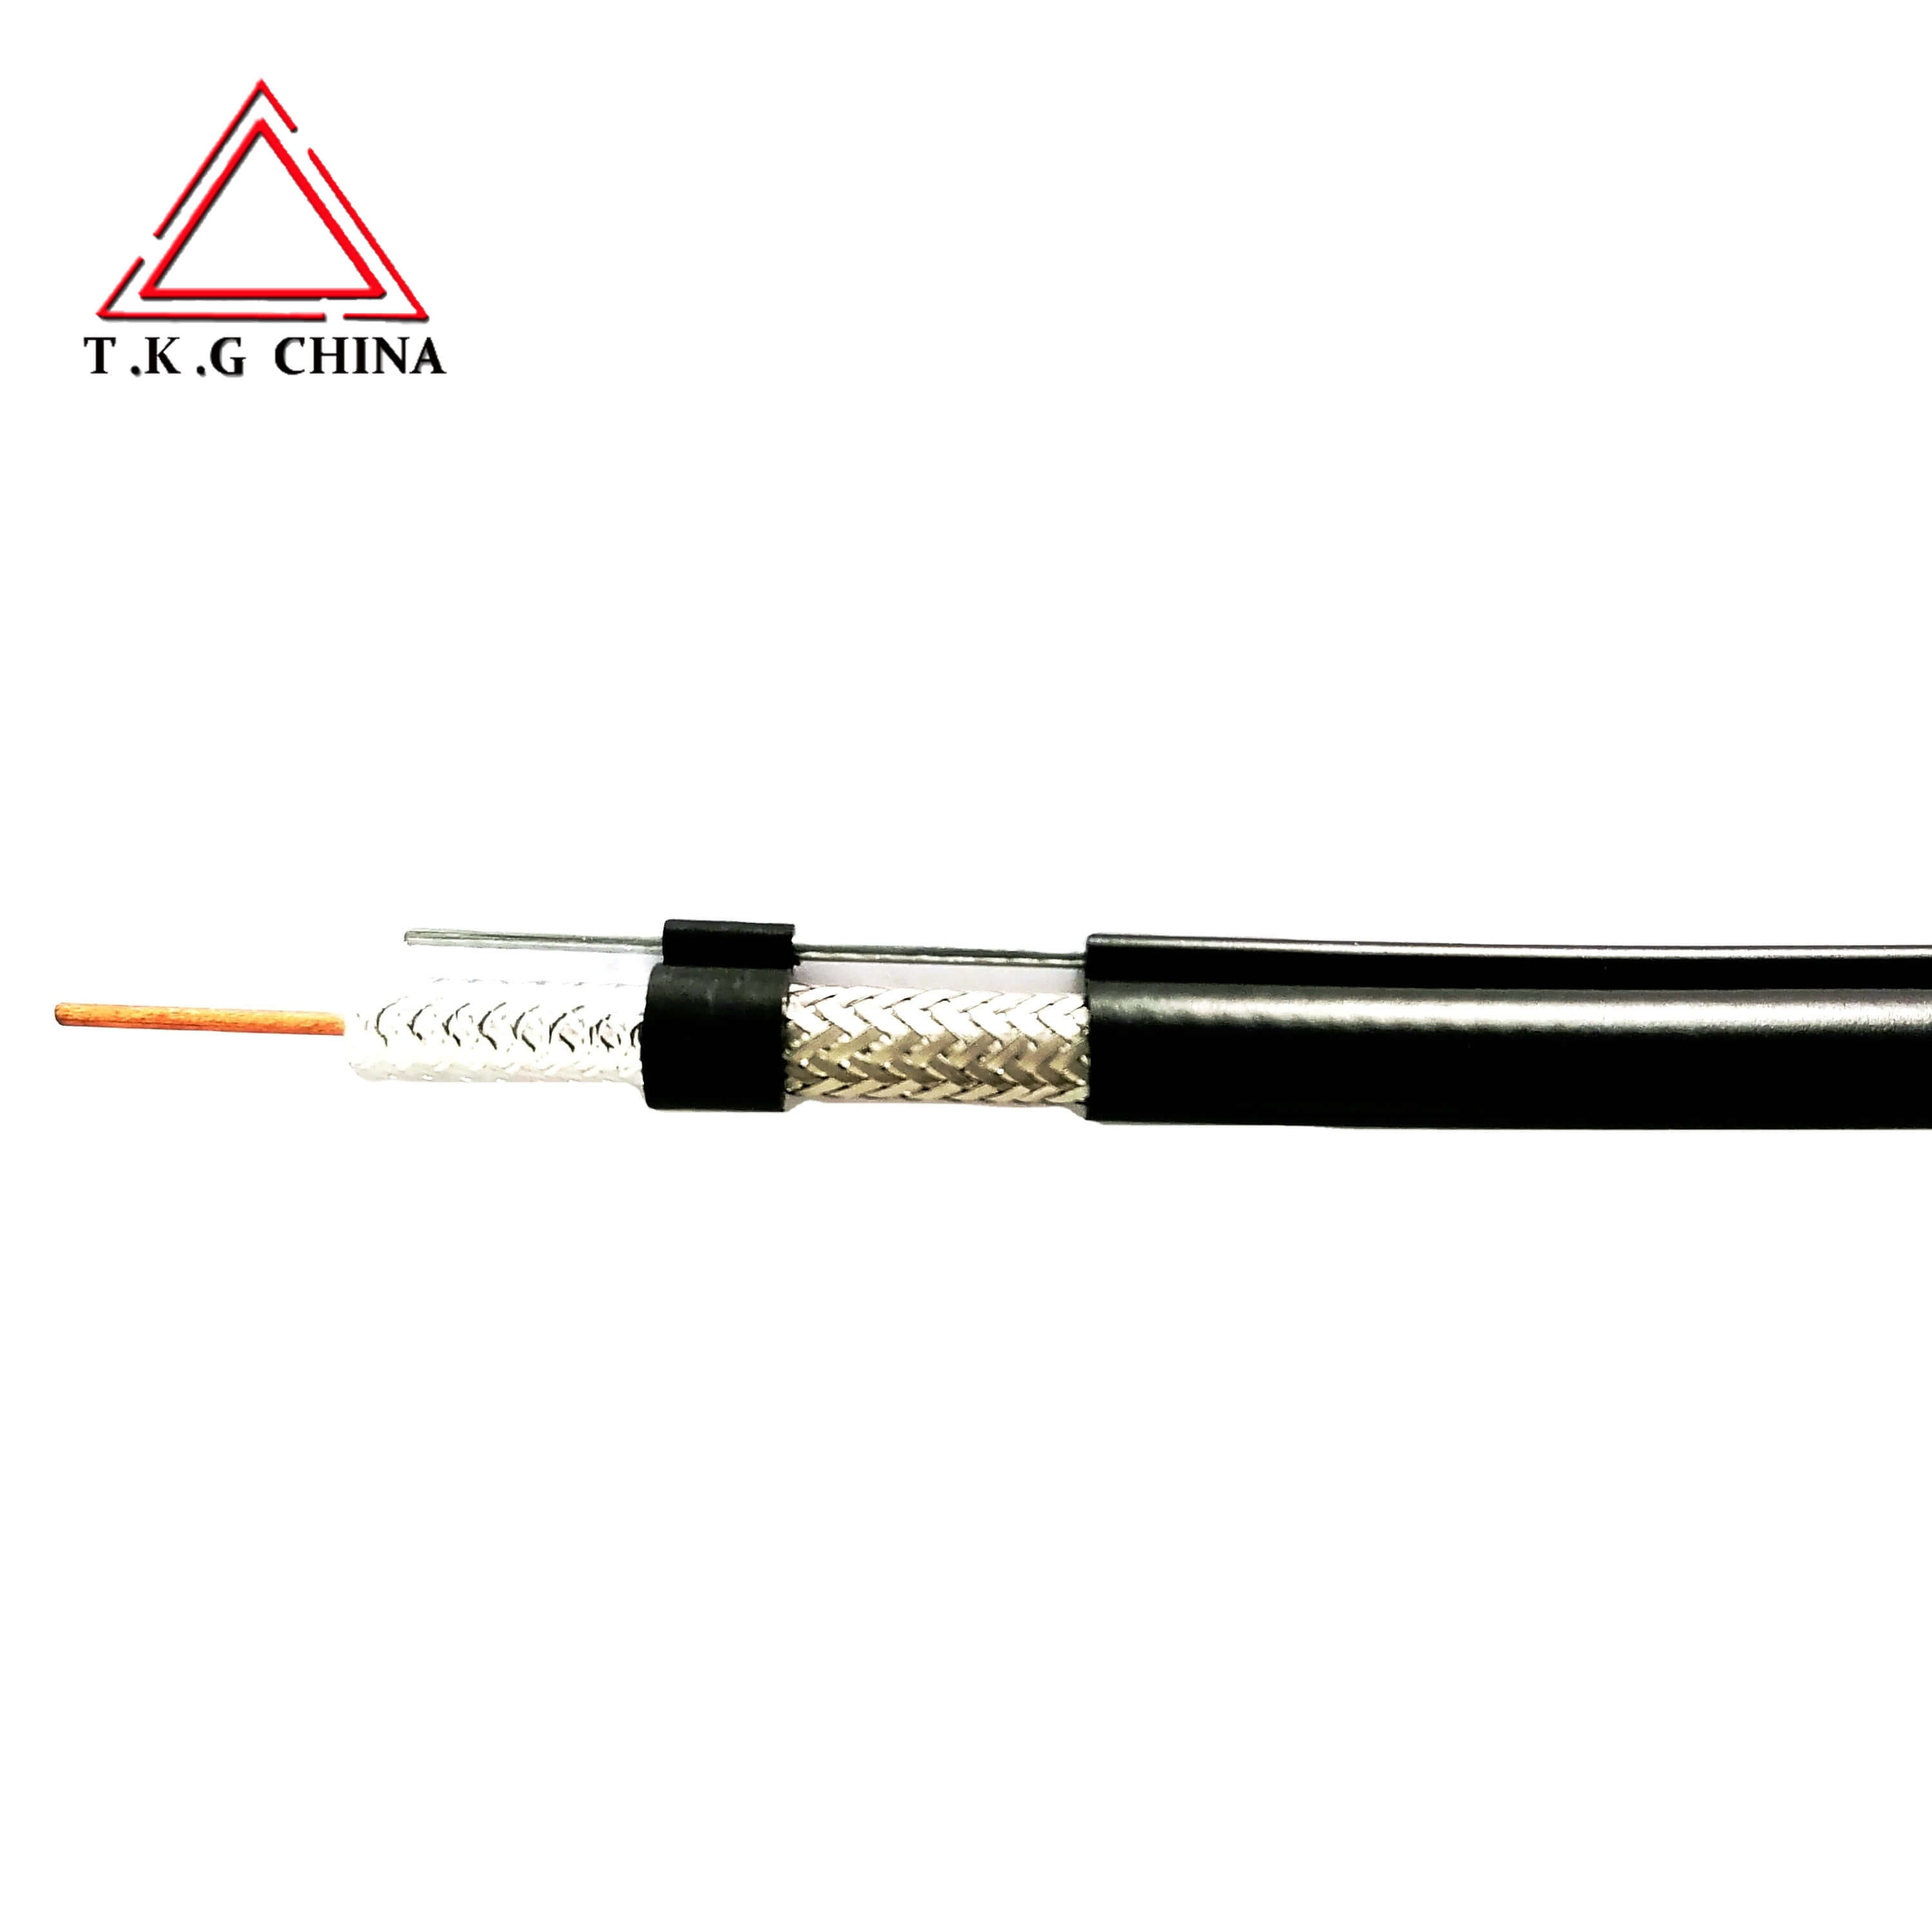 2.5mm2 BV cable,solid copper conductor pvc insulated single core cable 